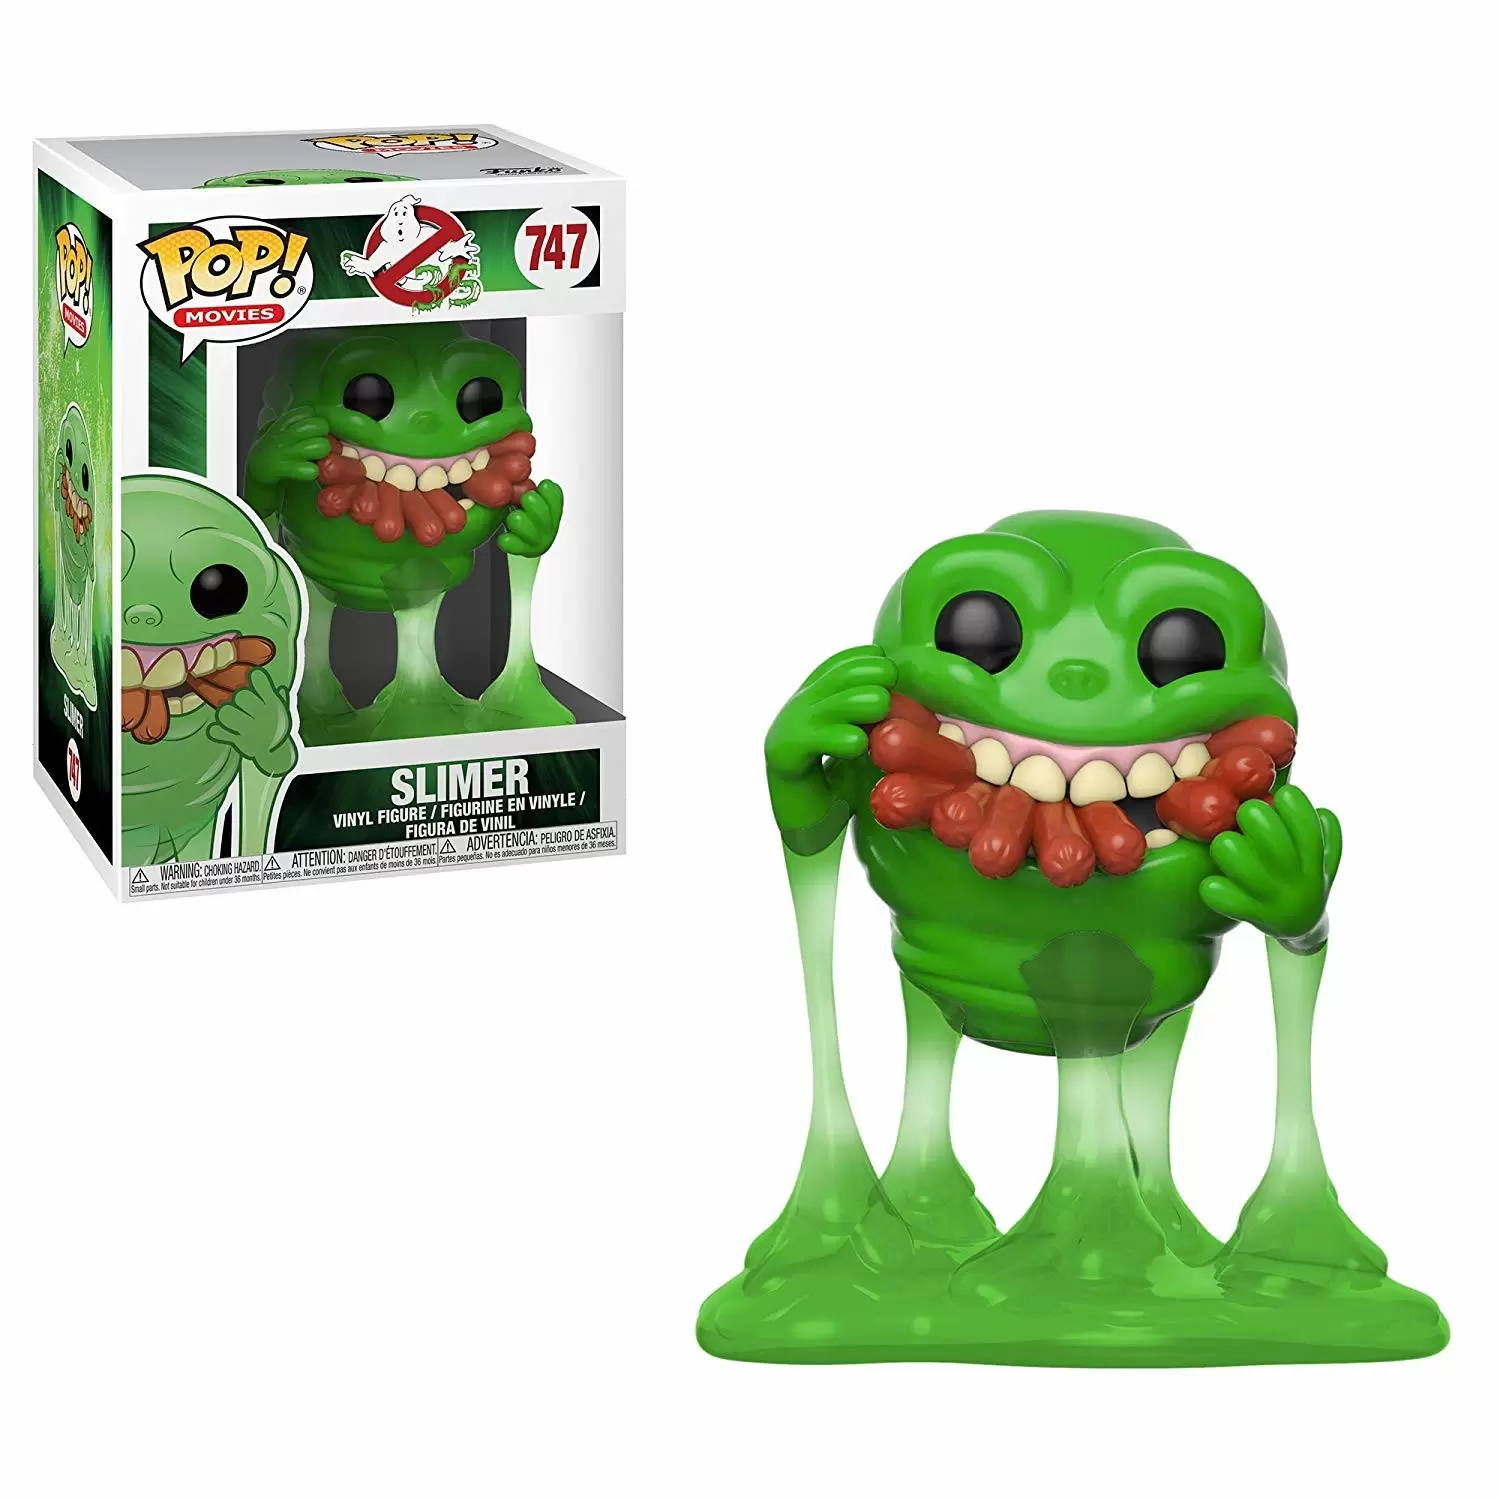 POP! Movies - Ghostbusters - Slimer with Hot Dogs